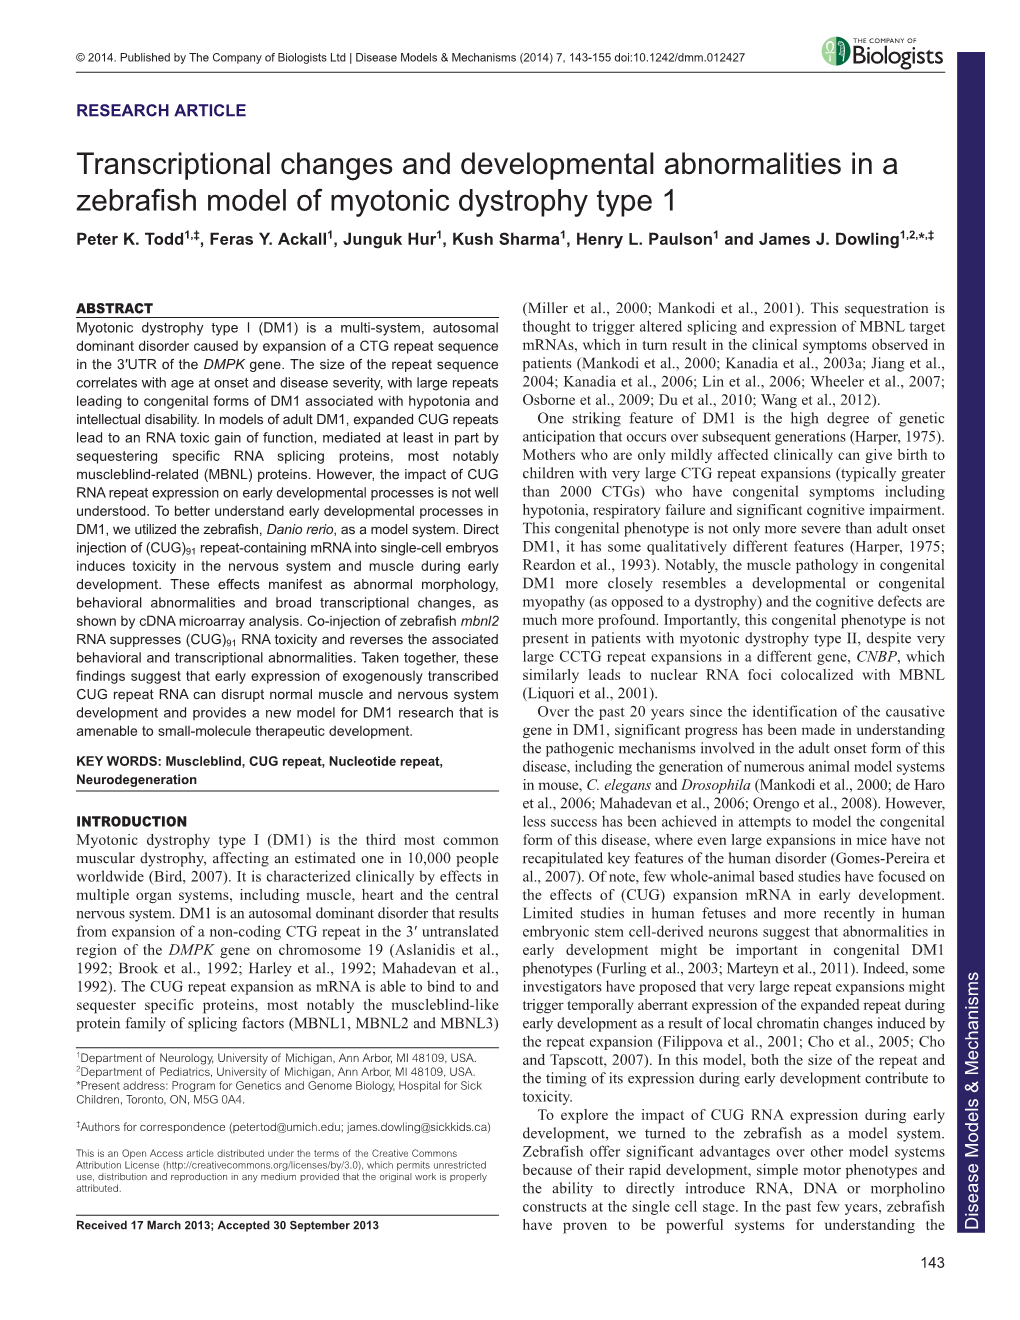 Transcriptional Changes and Developmental Abnormalities in a Zebrafish Model of Myotonic Dystrophy Type 1 Peter K